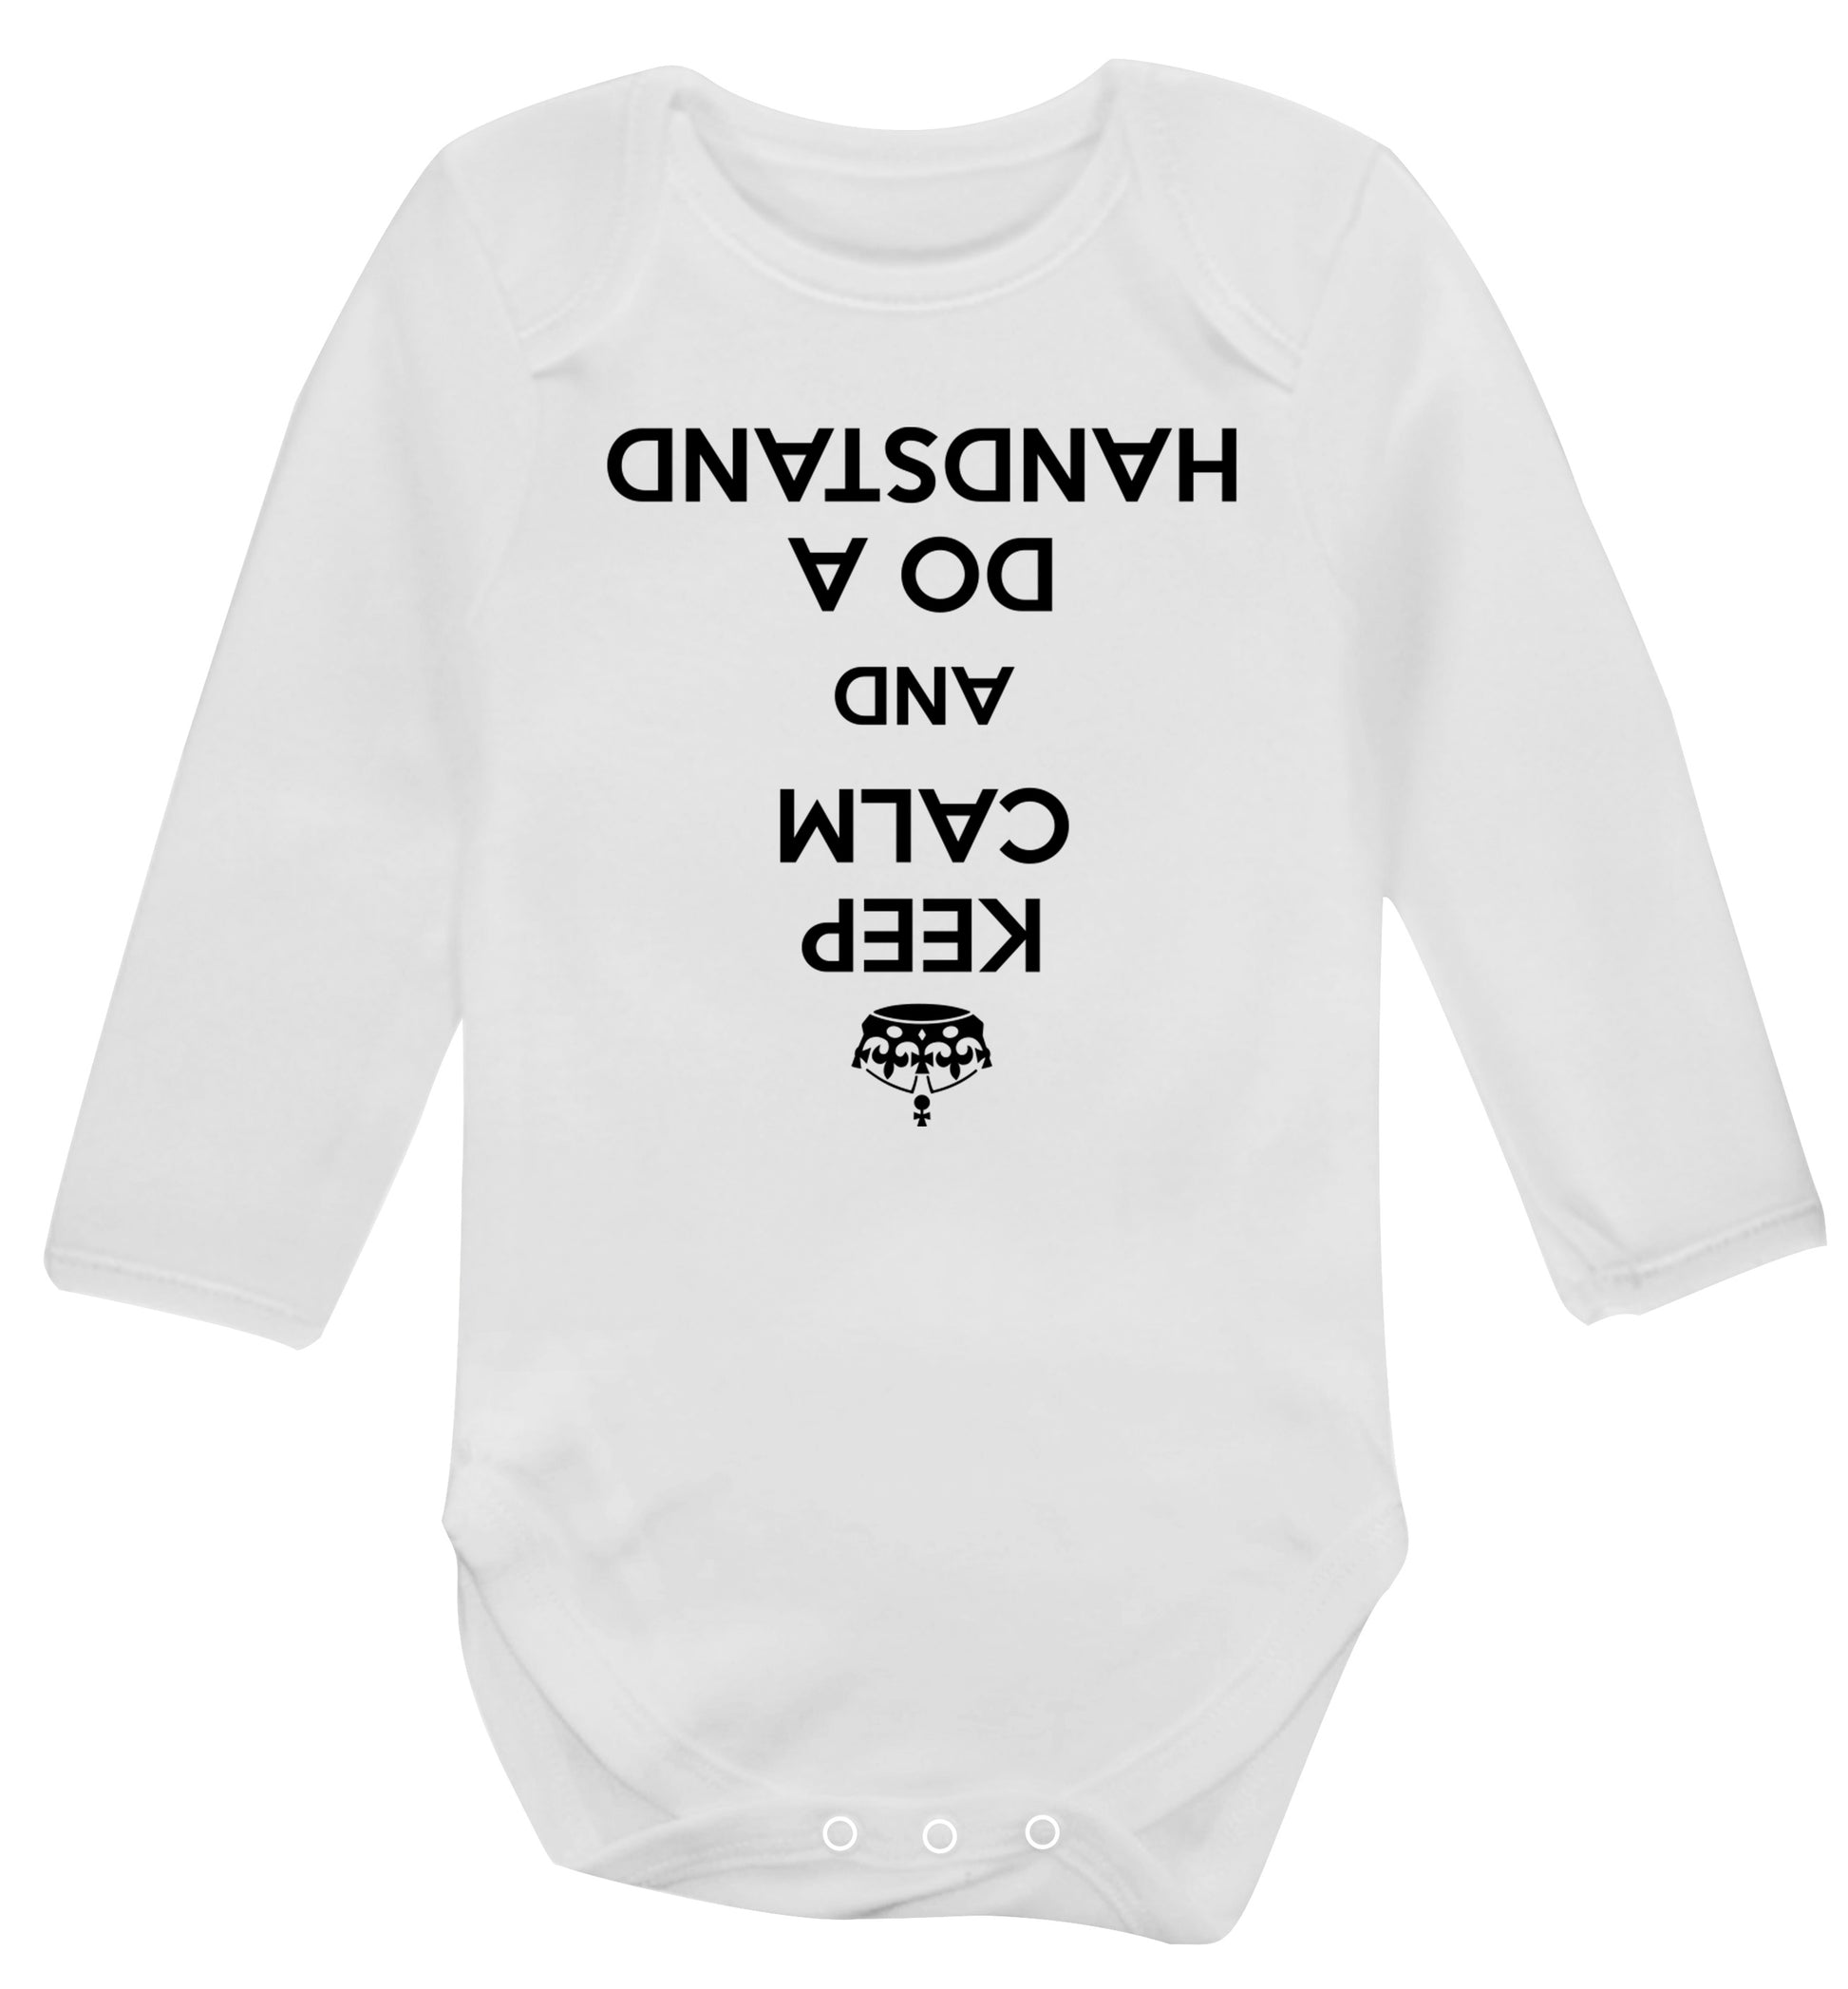 Keep calm and do a handstand Baby Vest long sleeved white 6-12 months